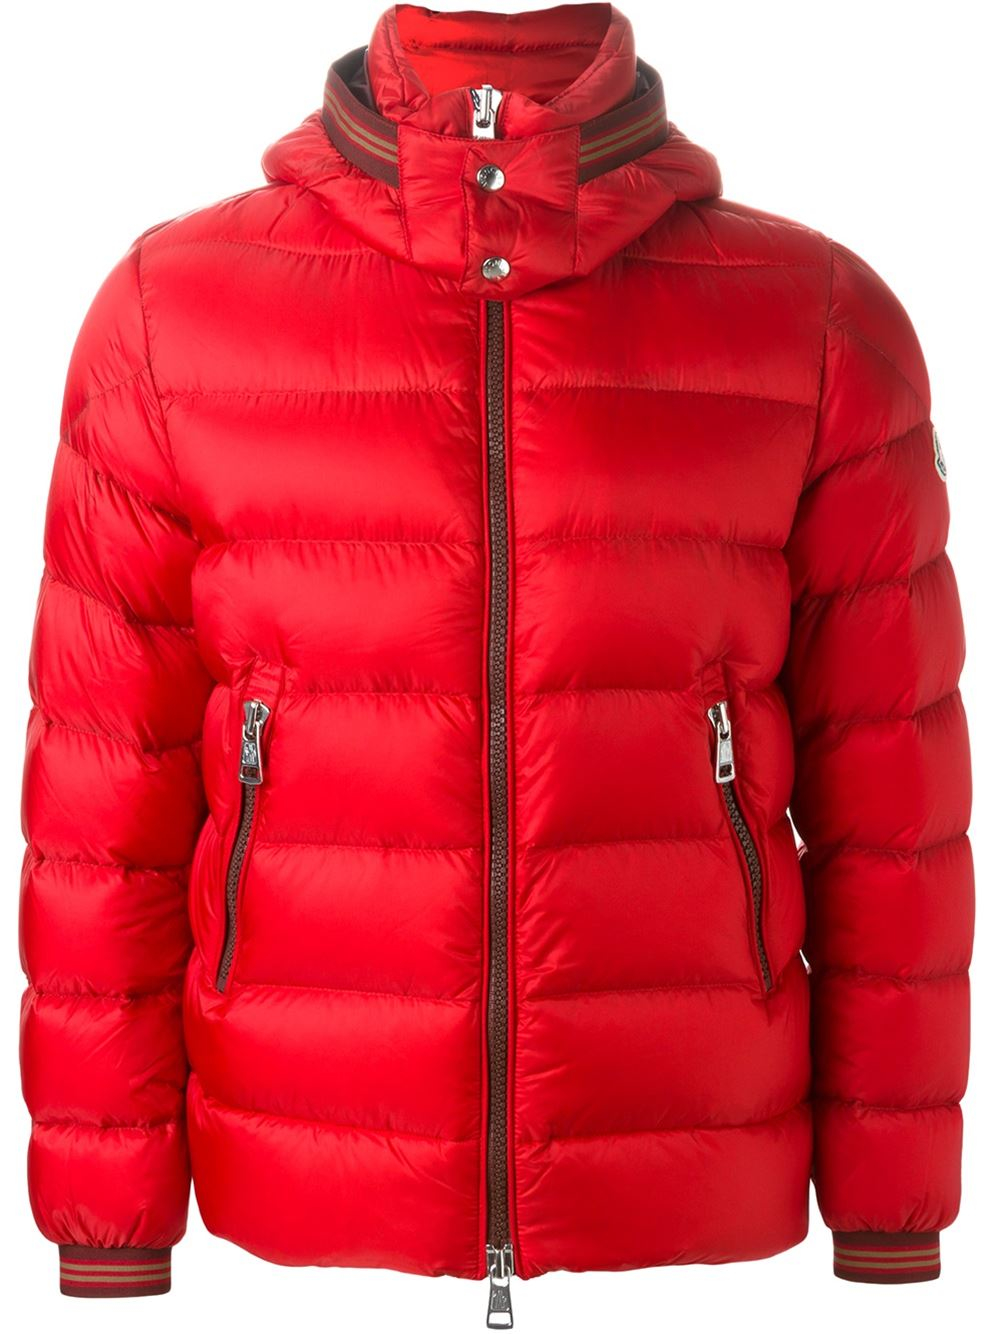 Lyst - Moncler 'thoule' Padded Jacket in Red for Men